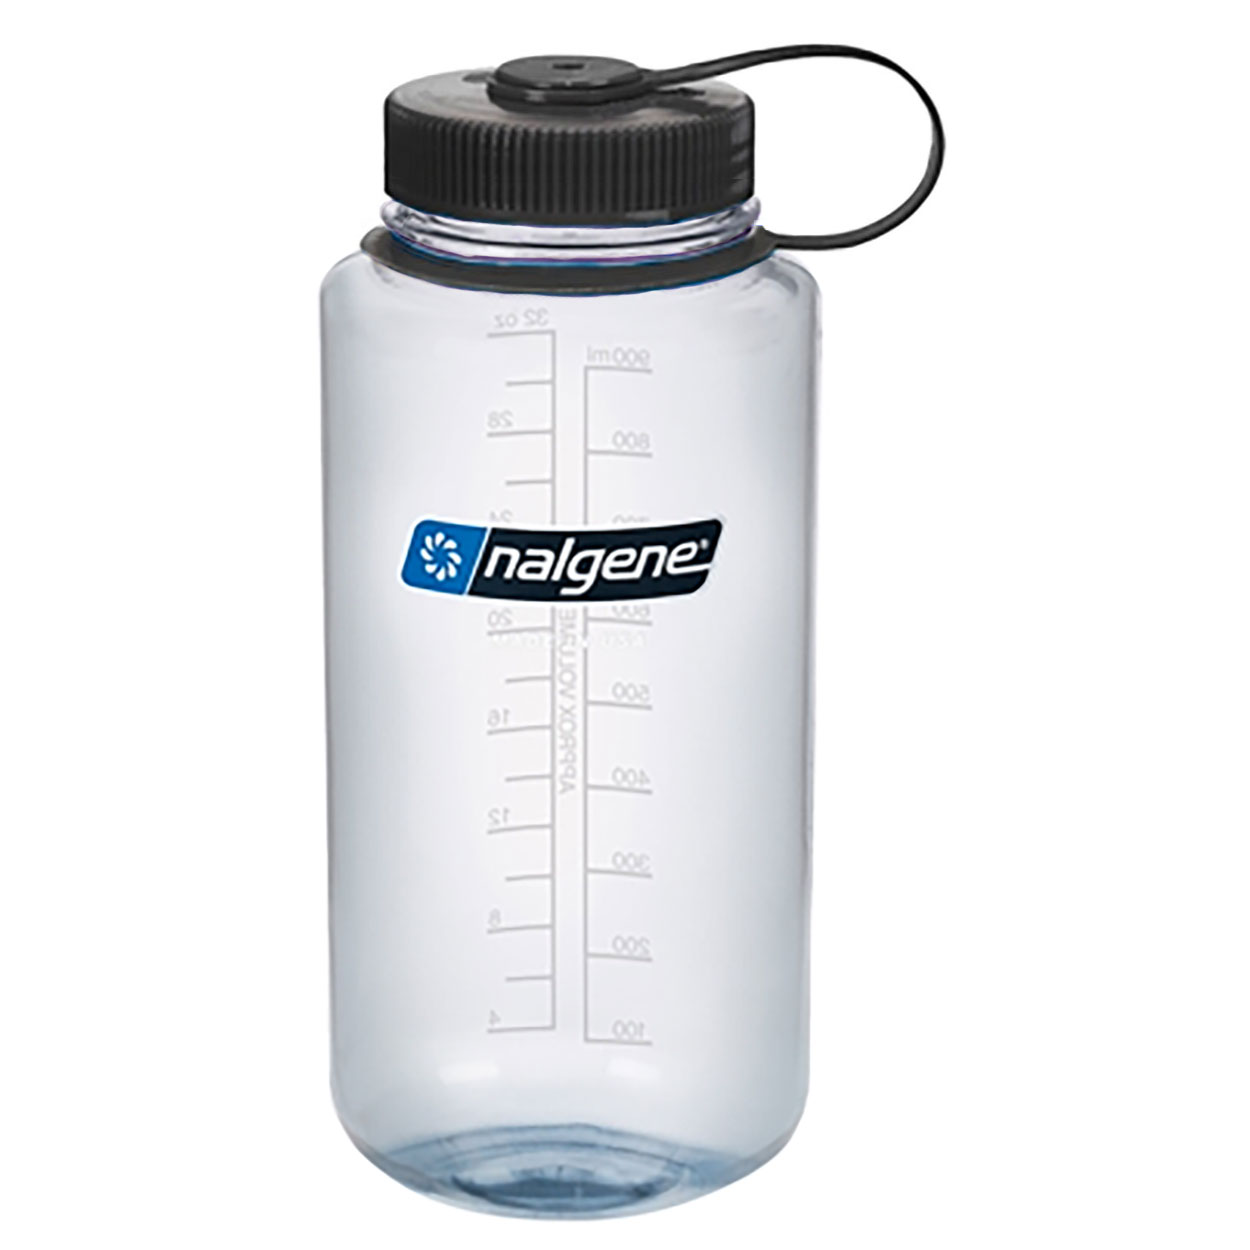 https://www.fuelforadventure.com/wp-content/uploads/2019/07/Nalgene_32oz_Wide_Mouth_Clear_with_Black_Lid__78827.jpg